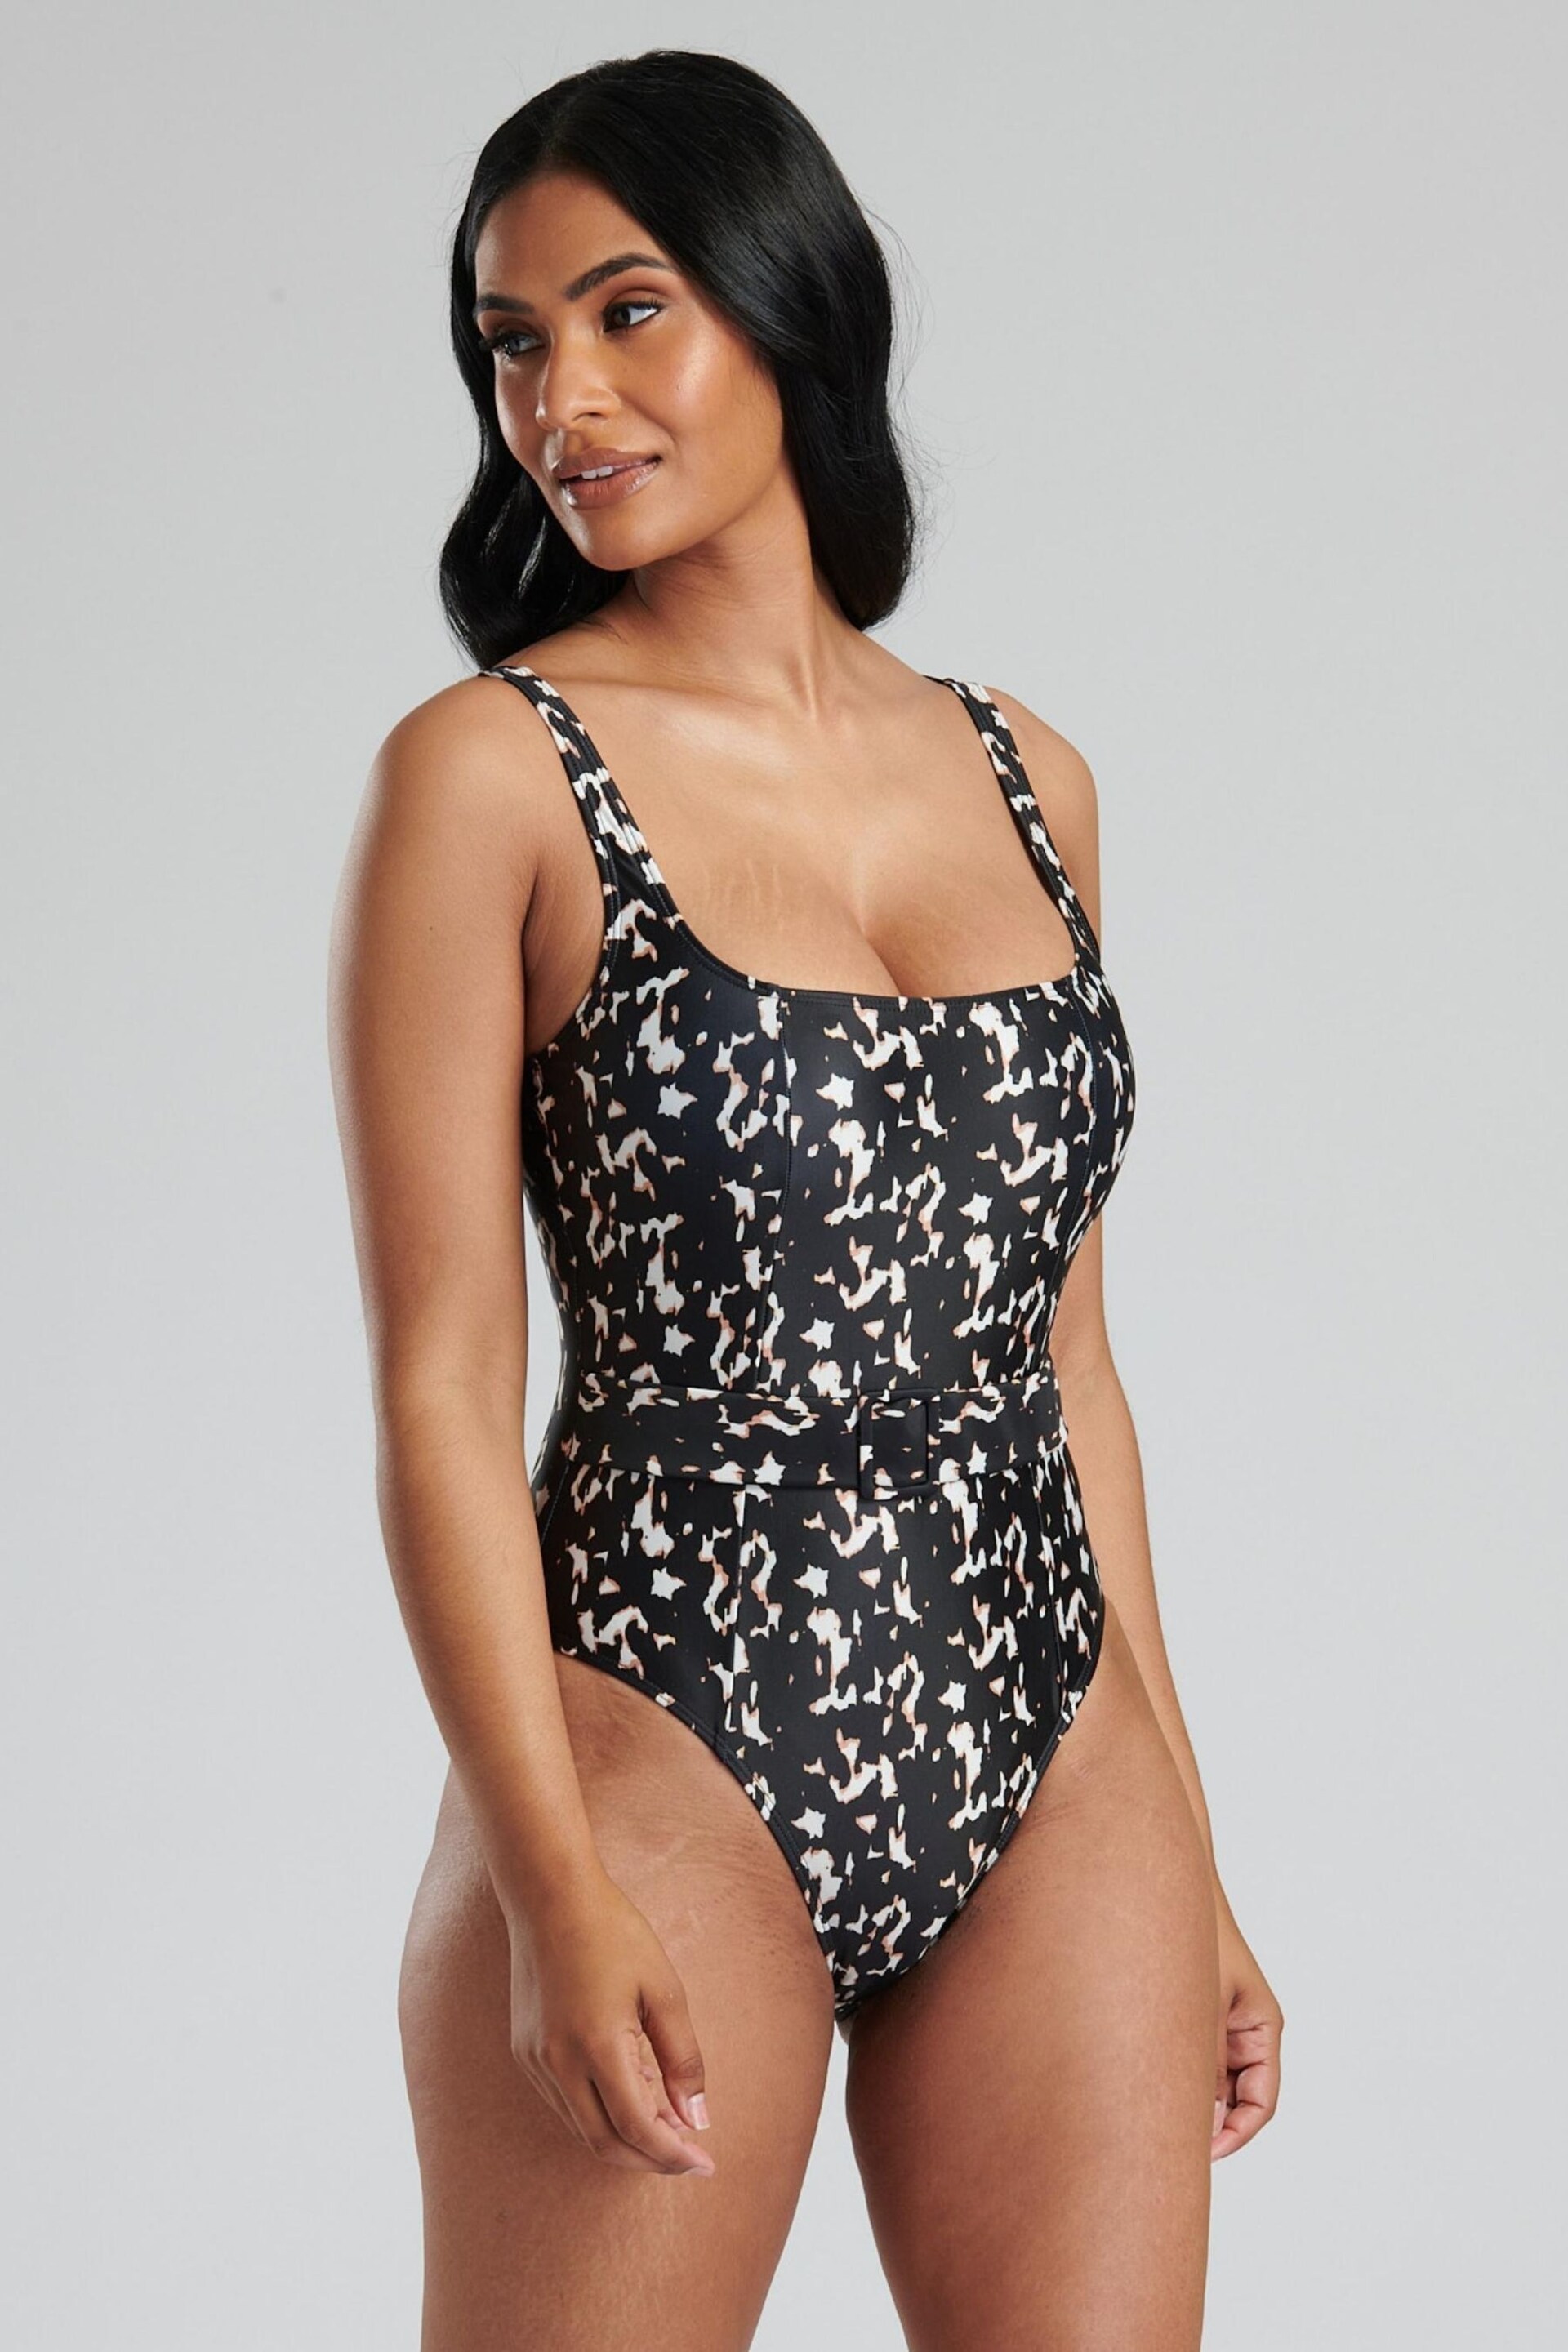 South Beach Black Animal Tummy Control  Swimsuit with Belt and Buckle - Image 3 of 6